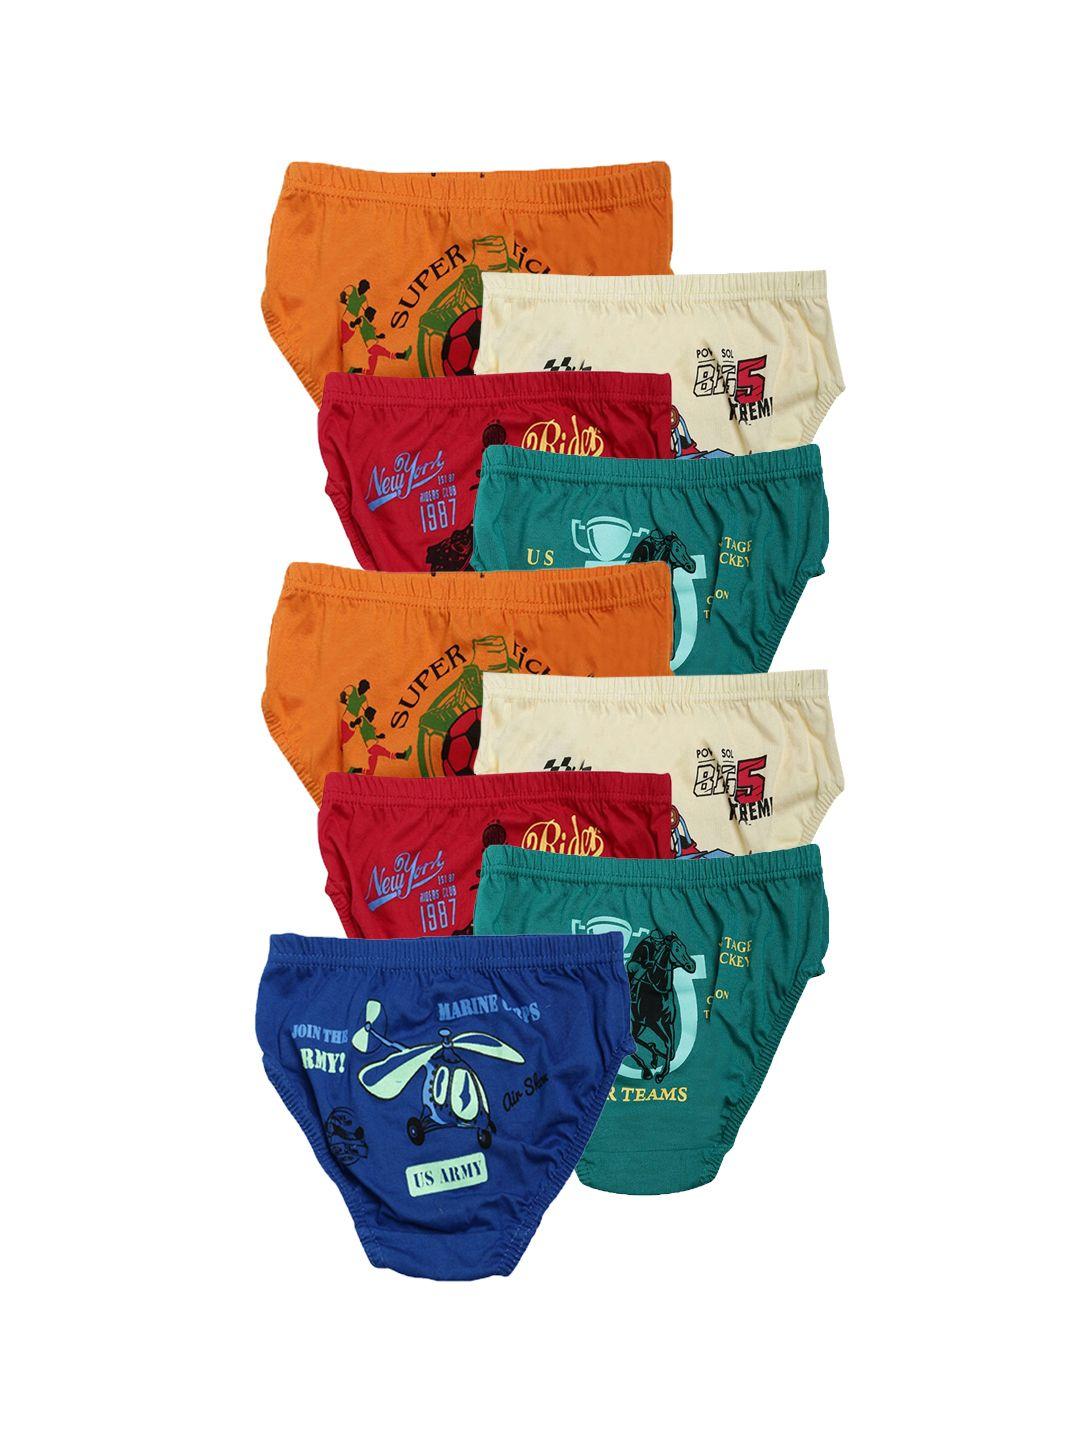 dollar kids care boys pack of 9 assorted pure cotton briefs mkkb-001-po9-asst